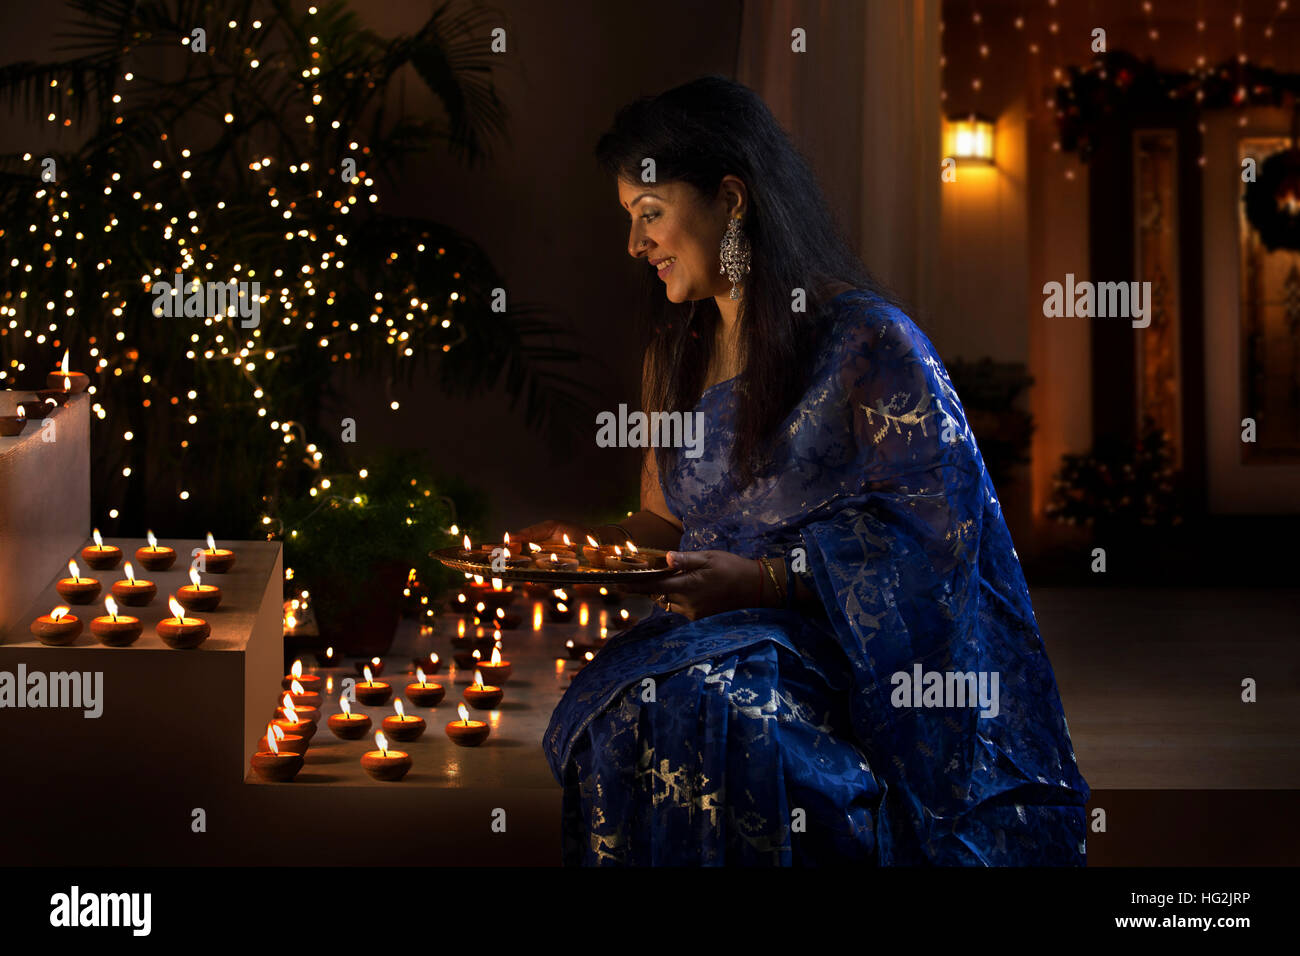 Woman arranging oil lamps at a diwali festival Stock Photo